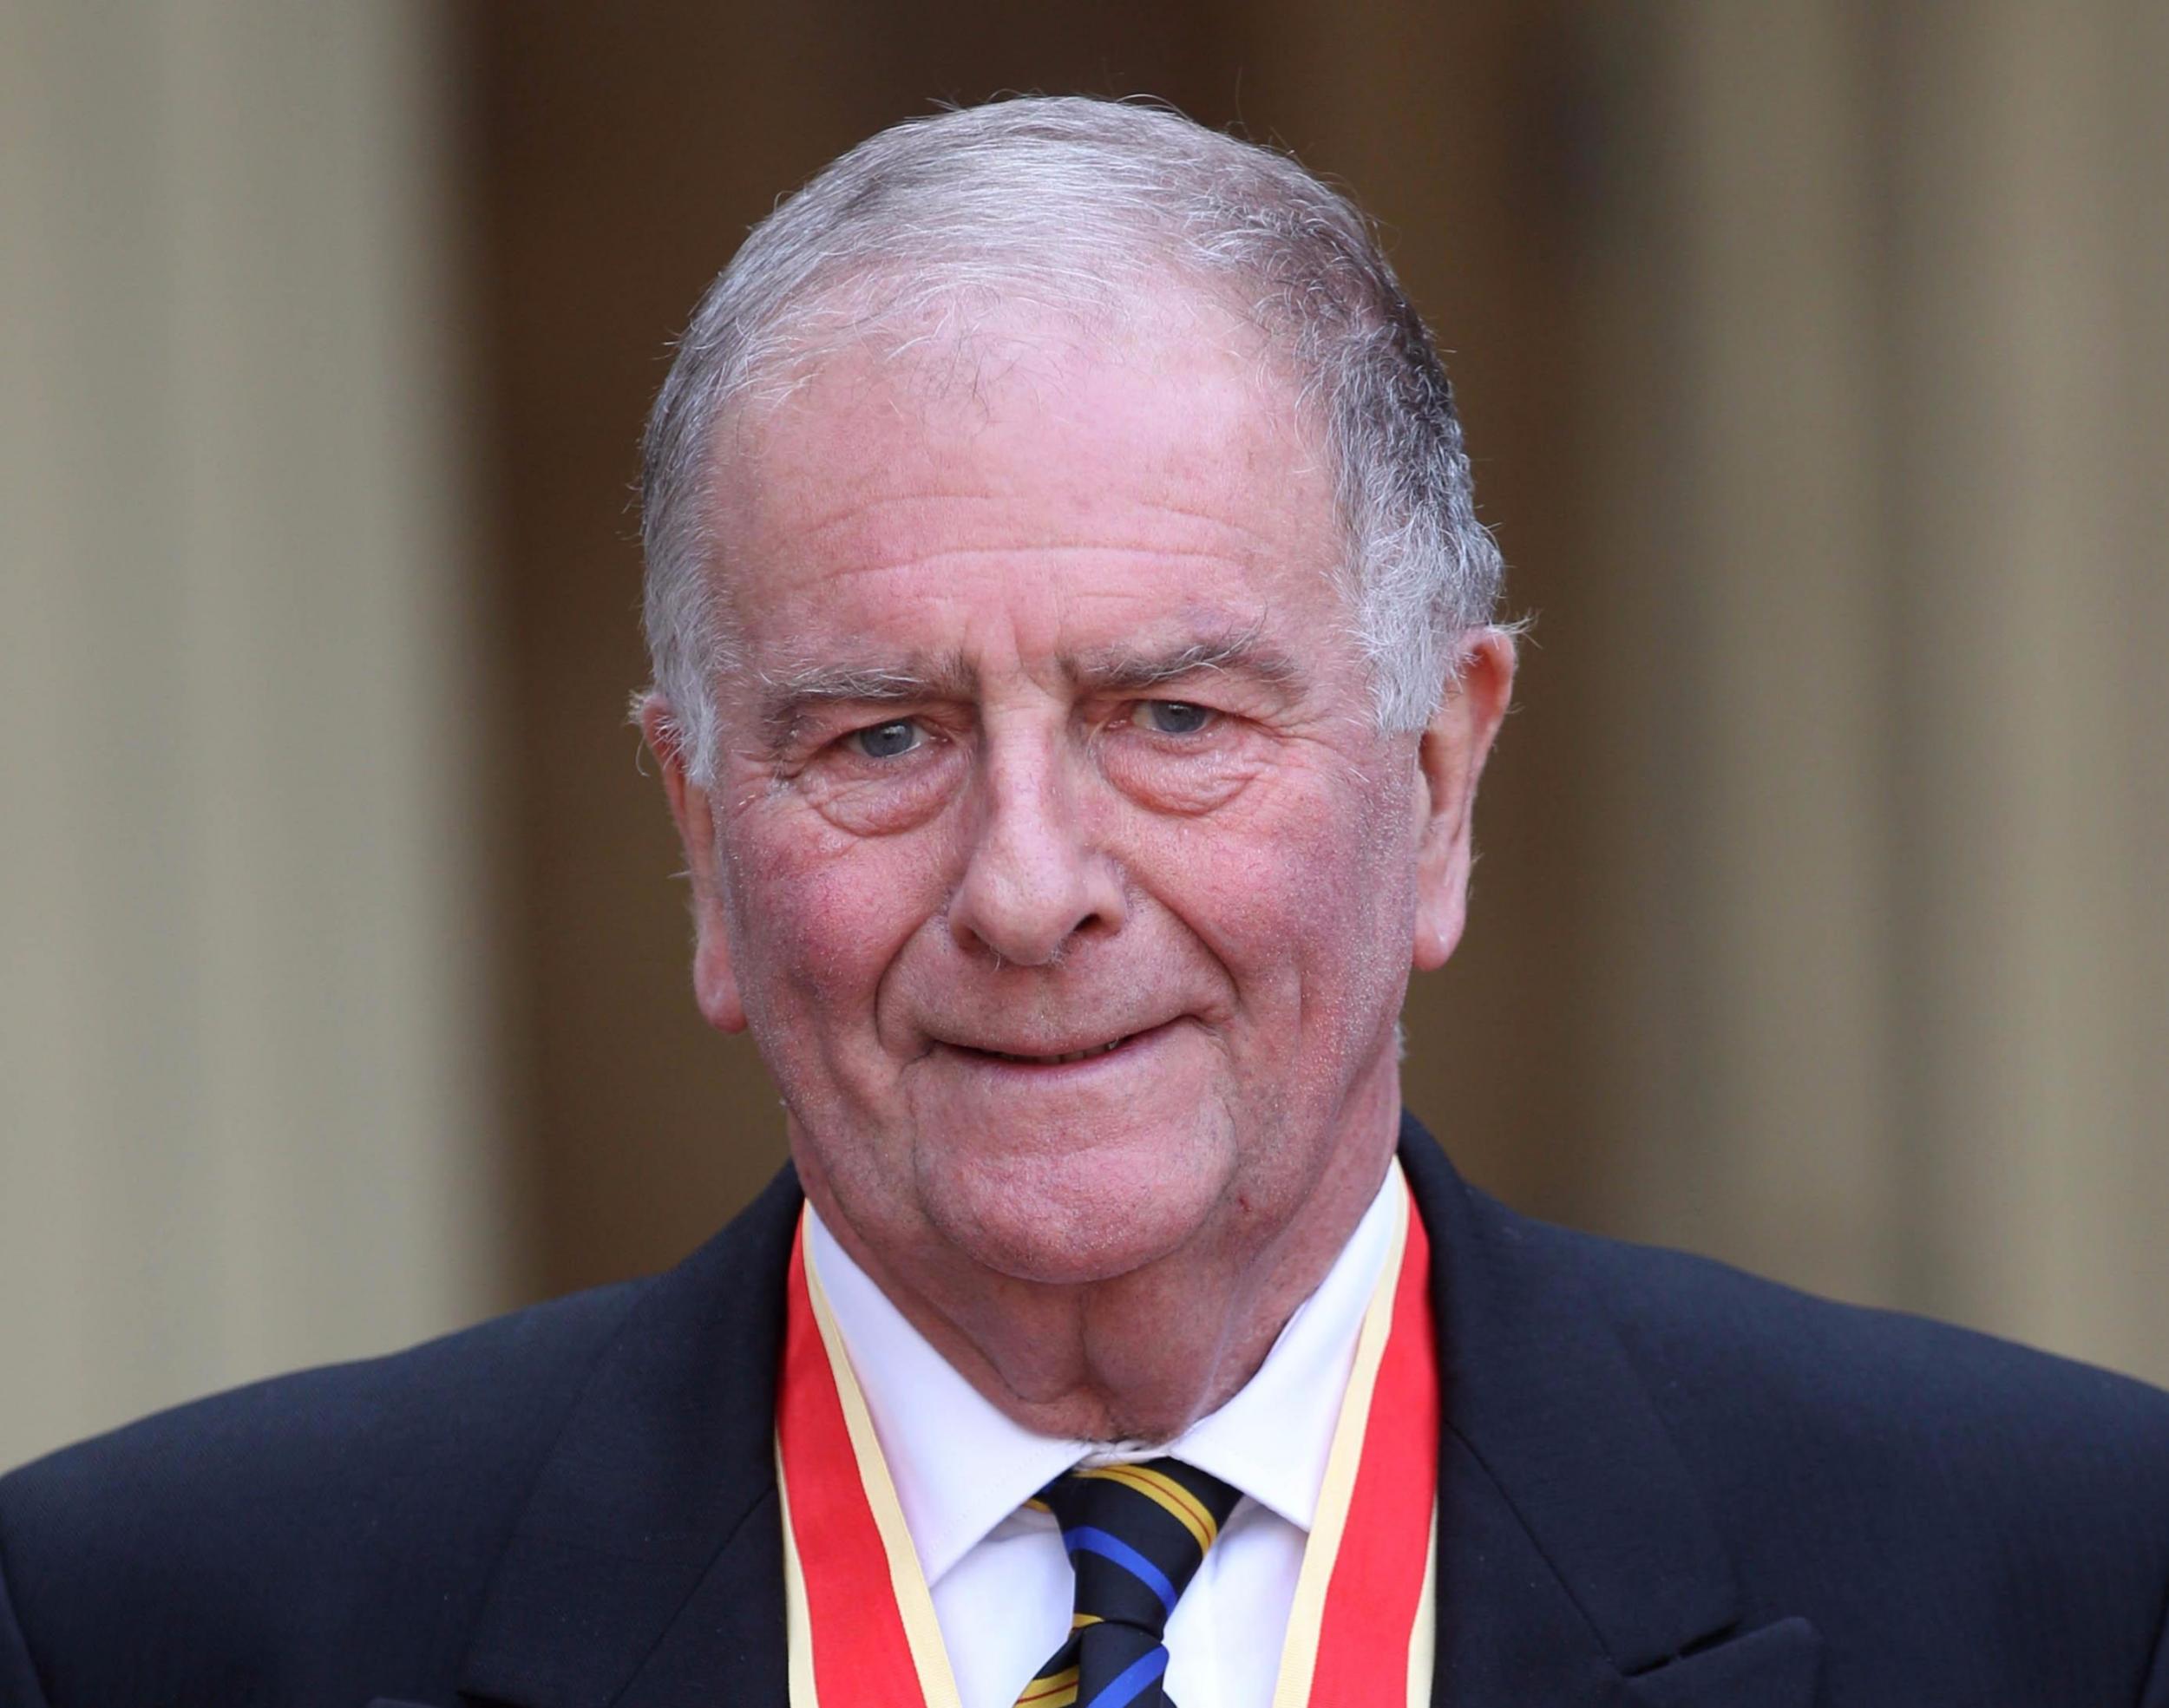 Sir Roger Gale has said that female journalists are fuelling the Westminster scandal with impossible-to-substantiate claims